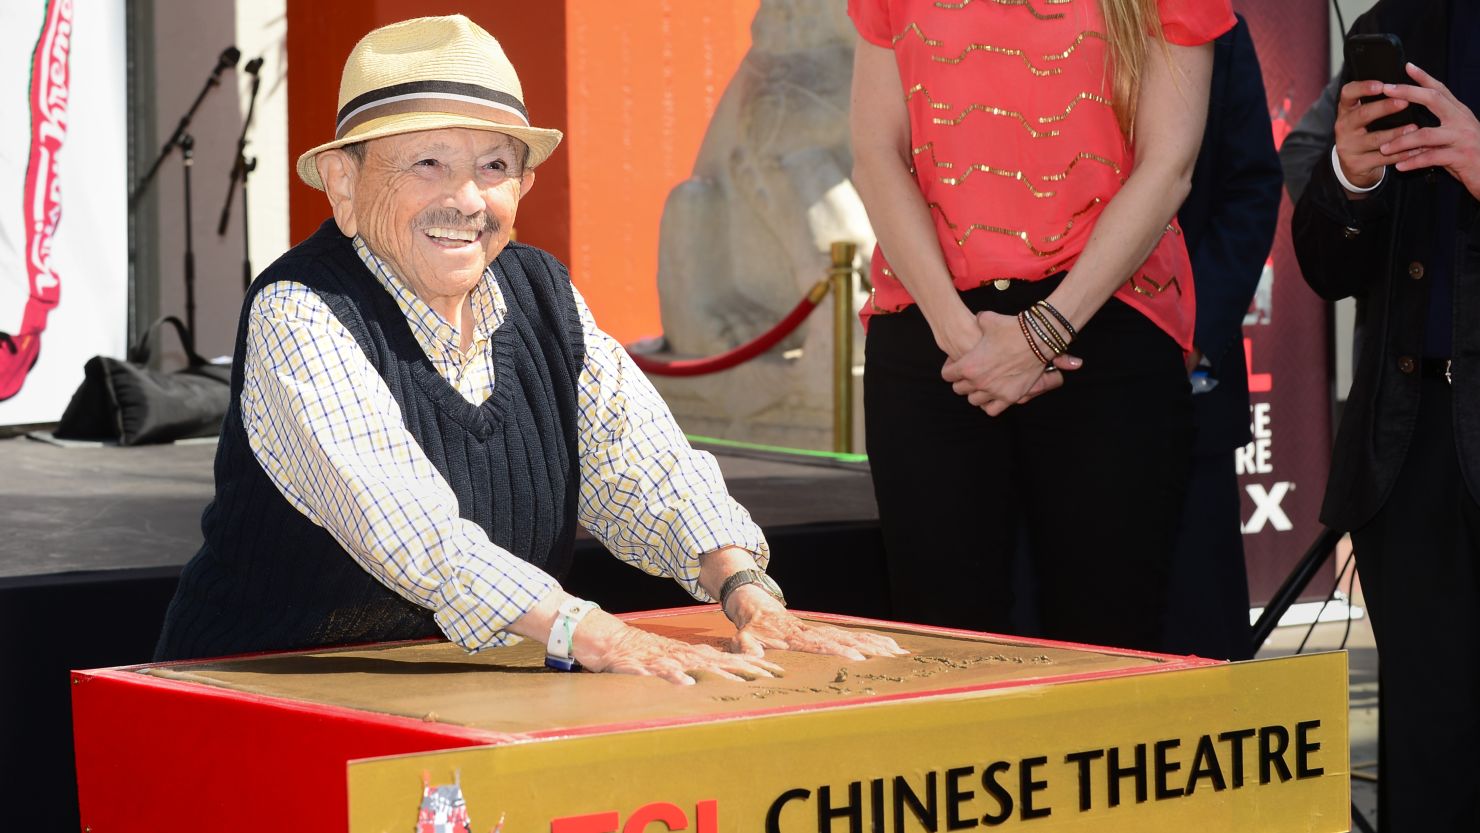 in 2013, Jerry Maren placed his handprints in cement outside Hollywood's Chinese Theatre.